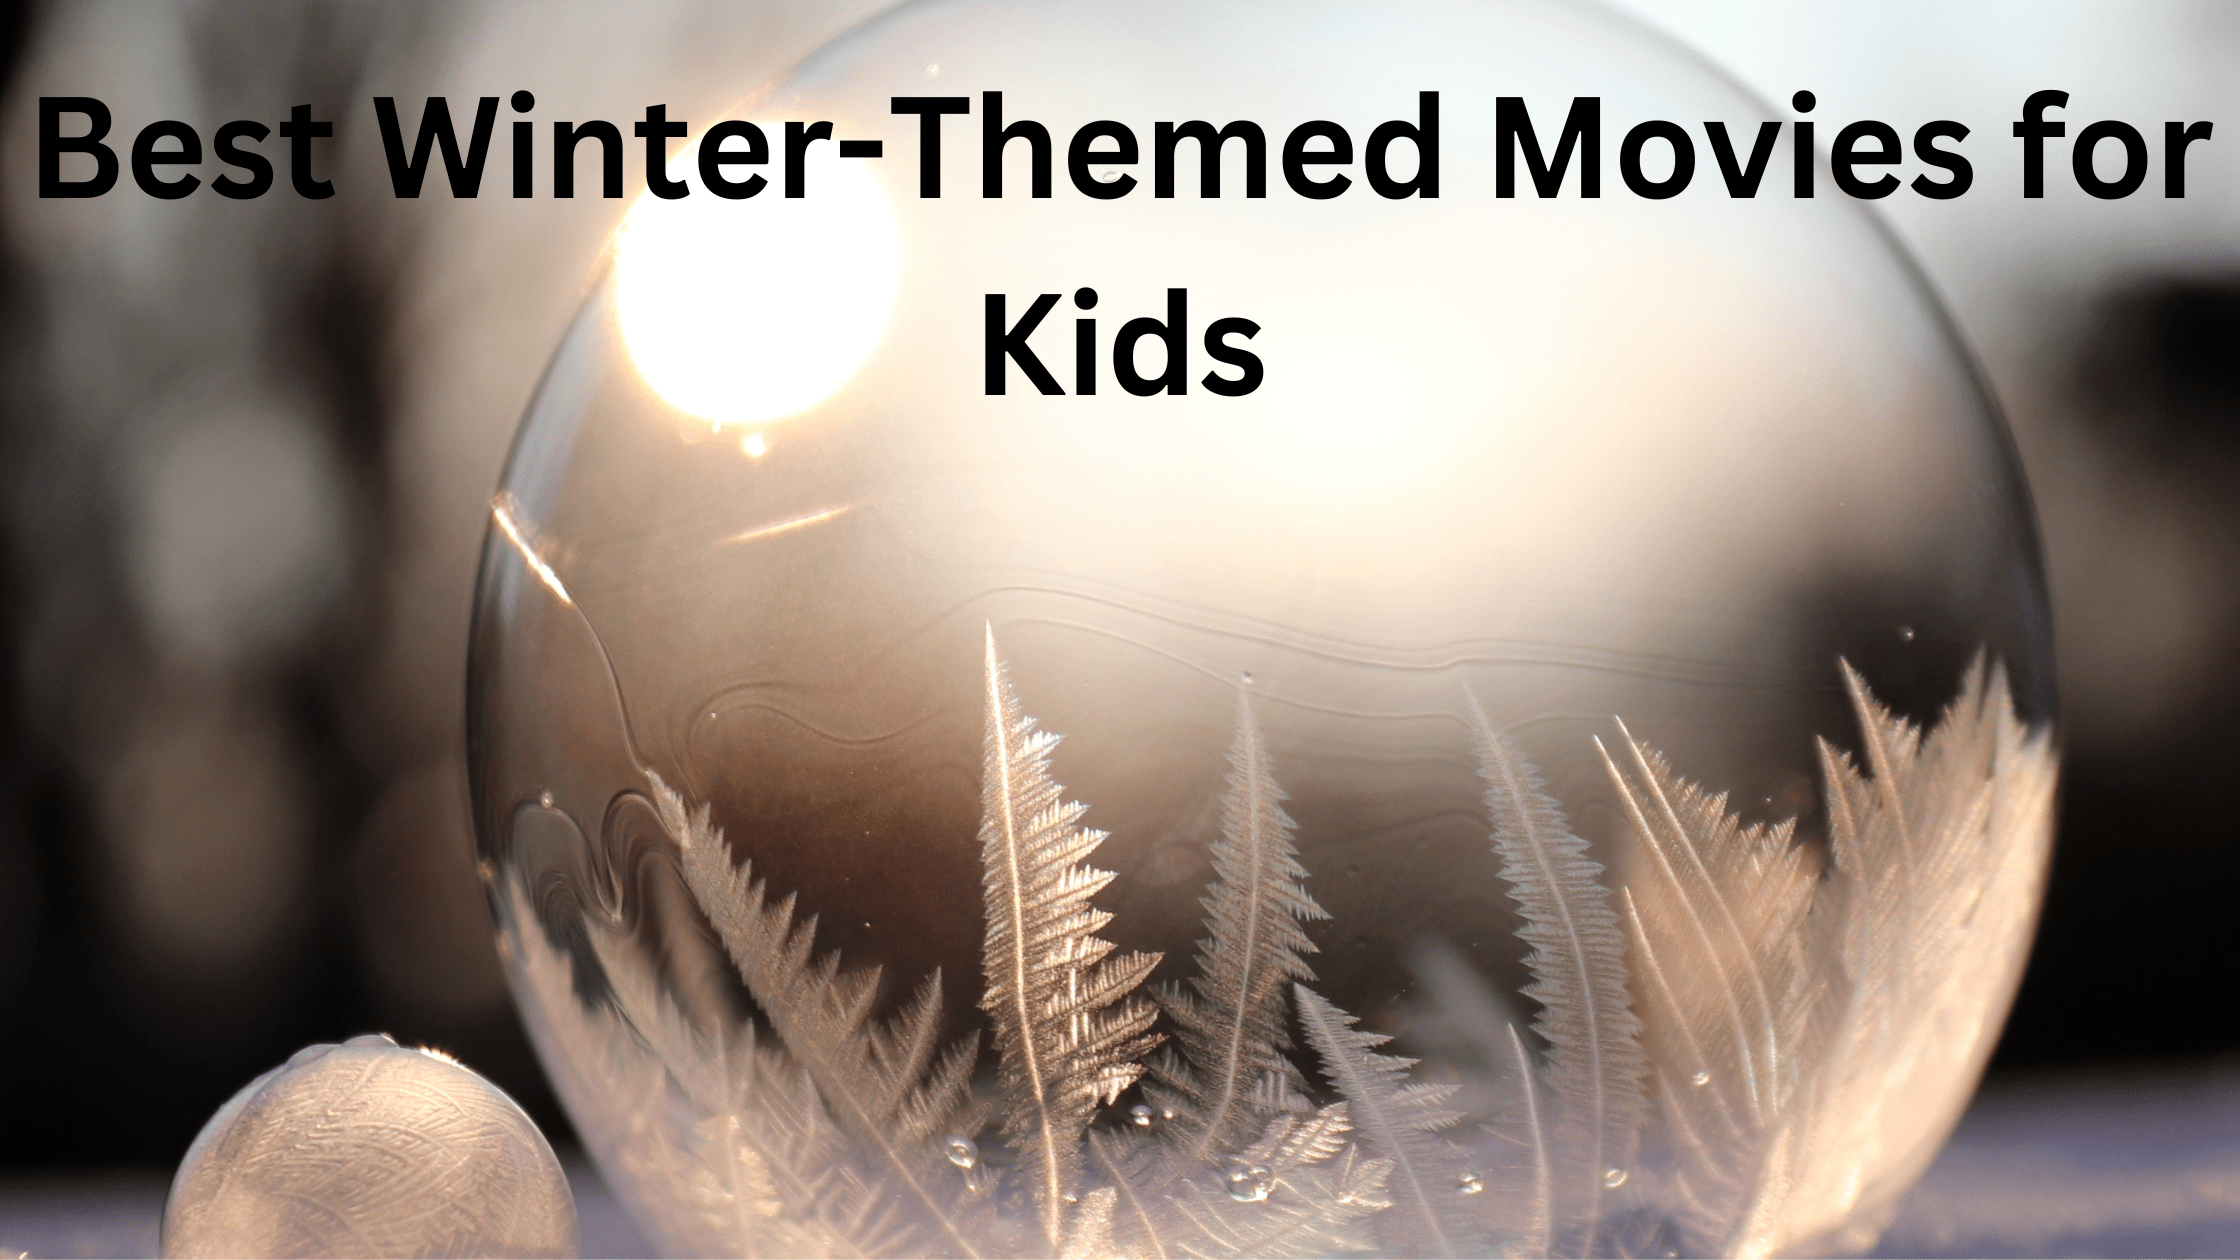 11 Best Winter-Themed Movies for Kids to Watch 39